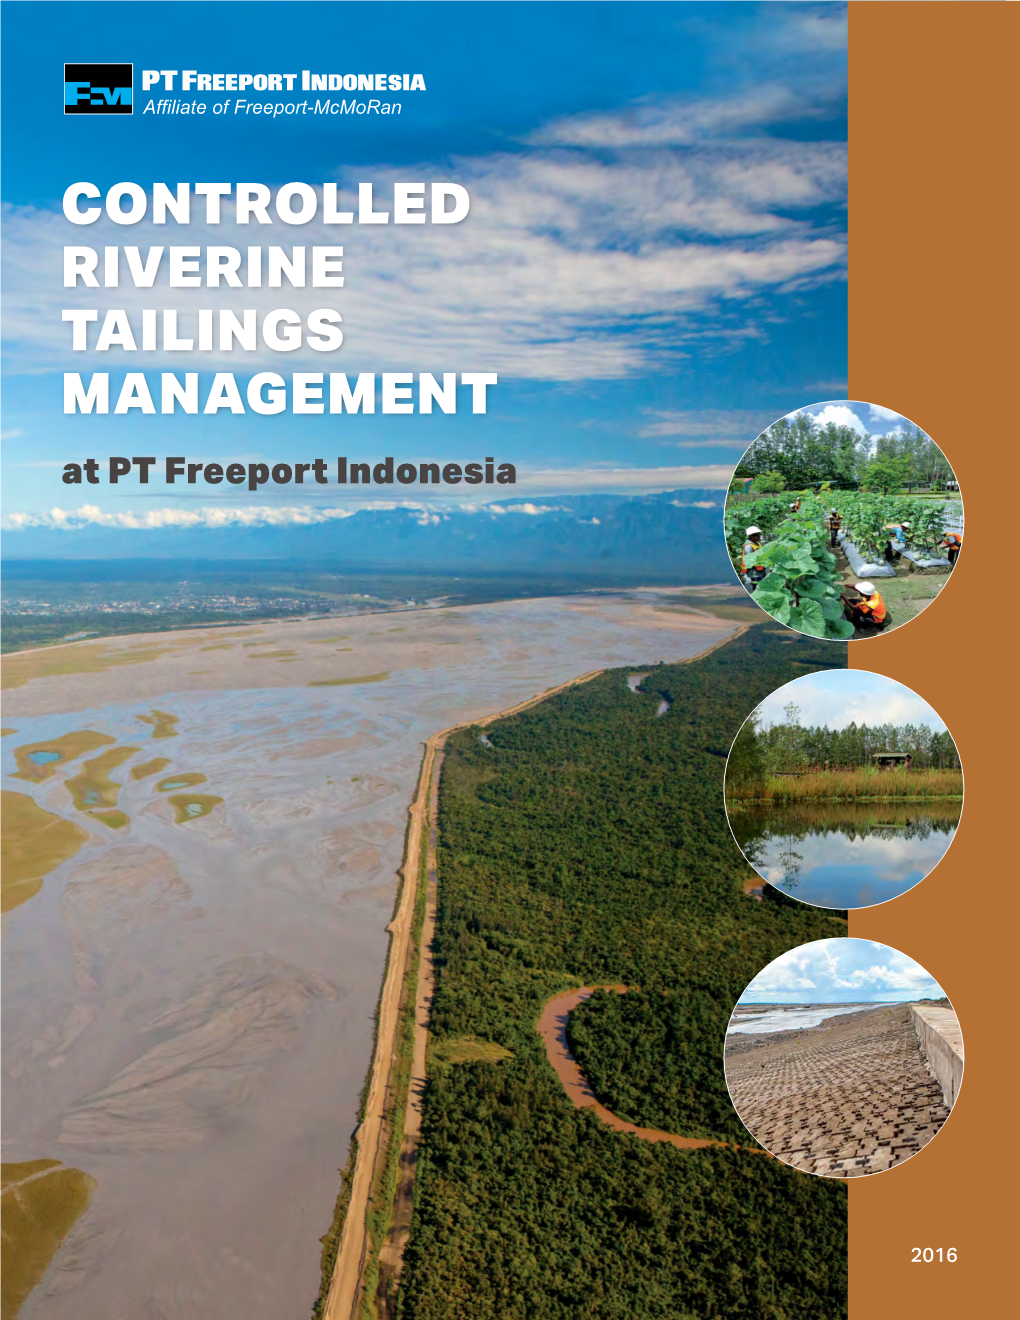 CONTROLLED RIVERINE TAILINGS MANAGEMENT at PT Freeport Indonesia